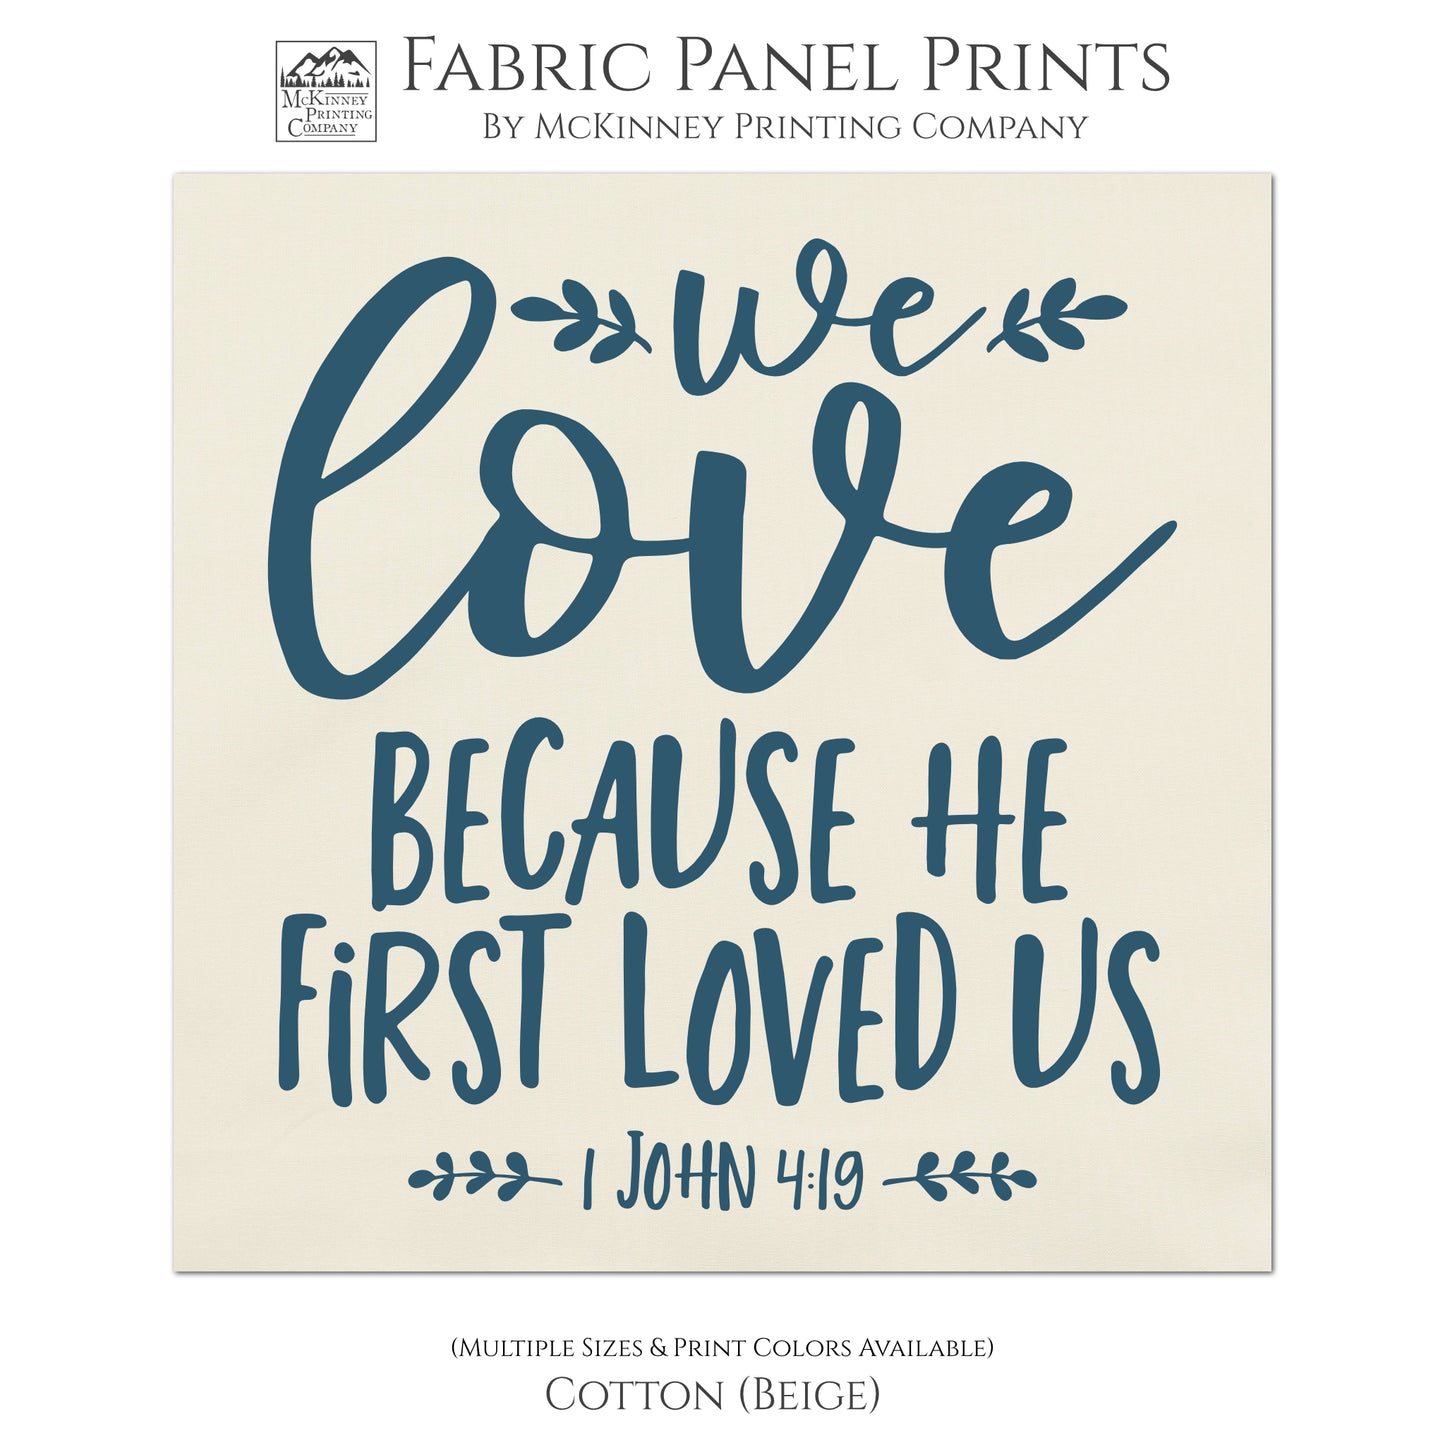 1 John 4:19, We love because he first loved us - Fabric Panel Print for Quilting, Sewing or Wall Art - Cotton, Beige